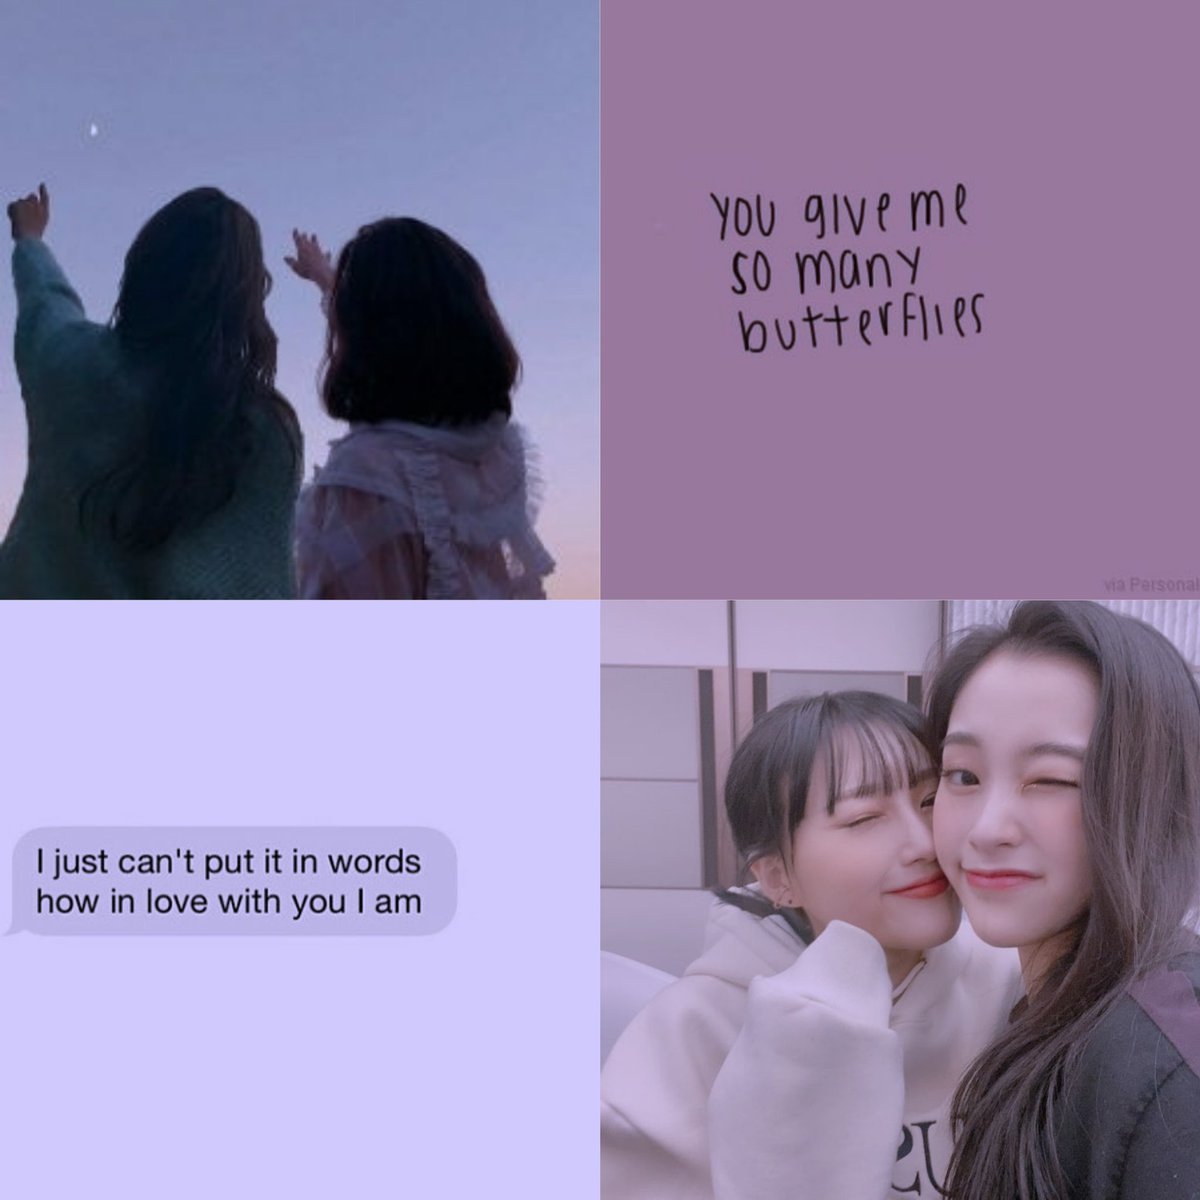 "i'm happy that it's you"siyeon and gahyeon used to live next to each other during their teens. now, a decade later, gahyeon moves into her first apartment only to discover that siyeon is living next to her again...